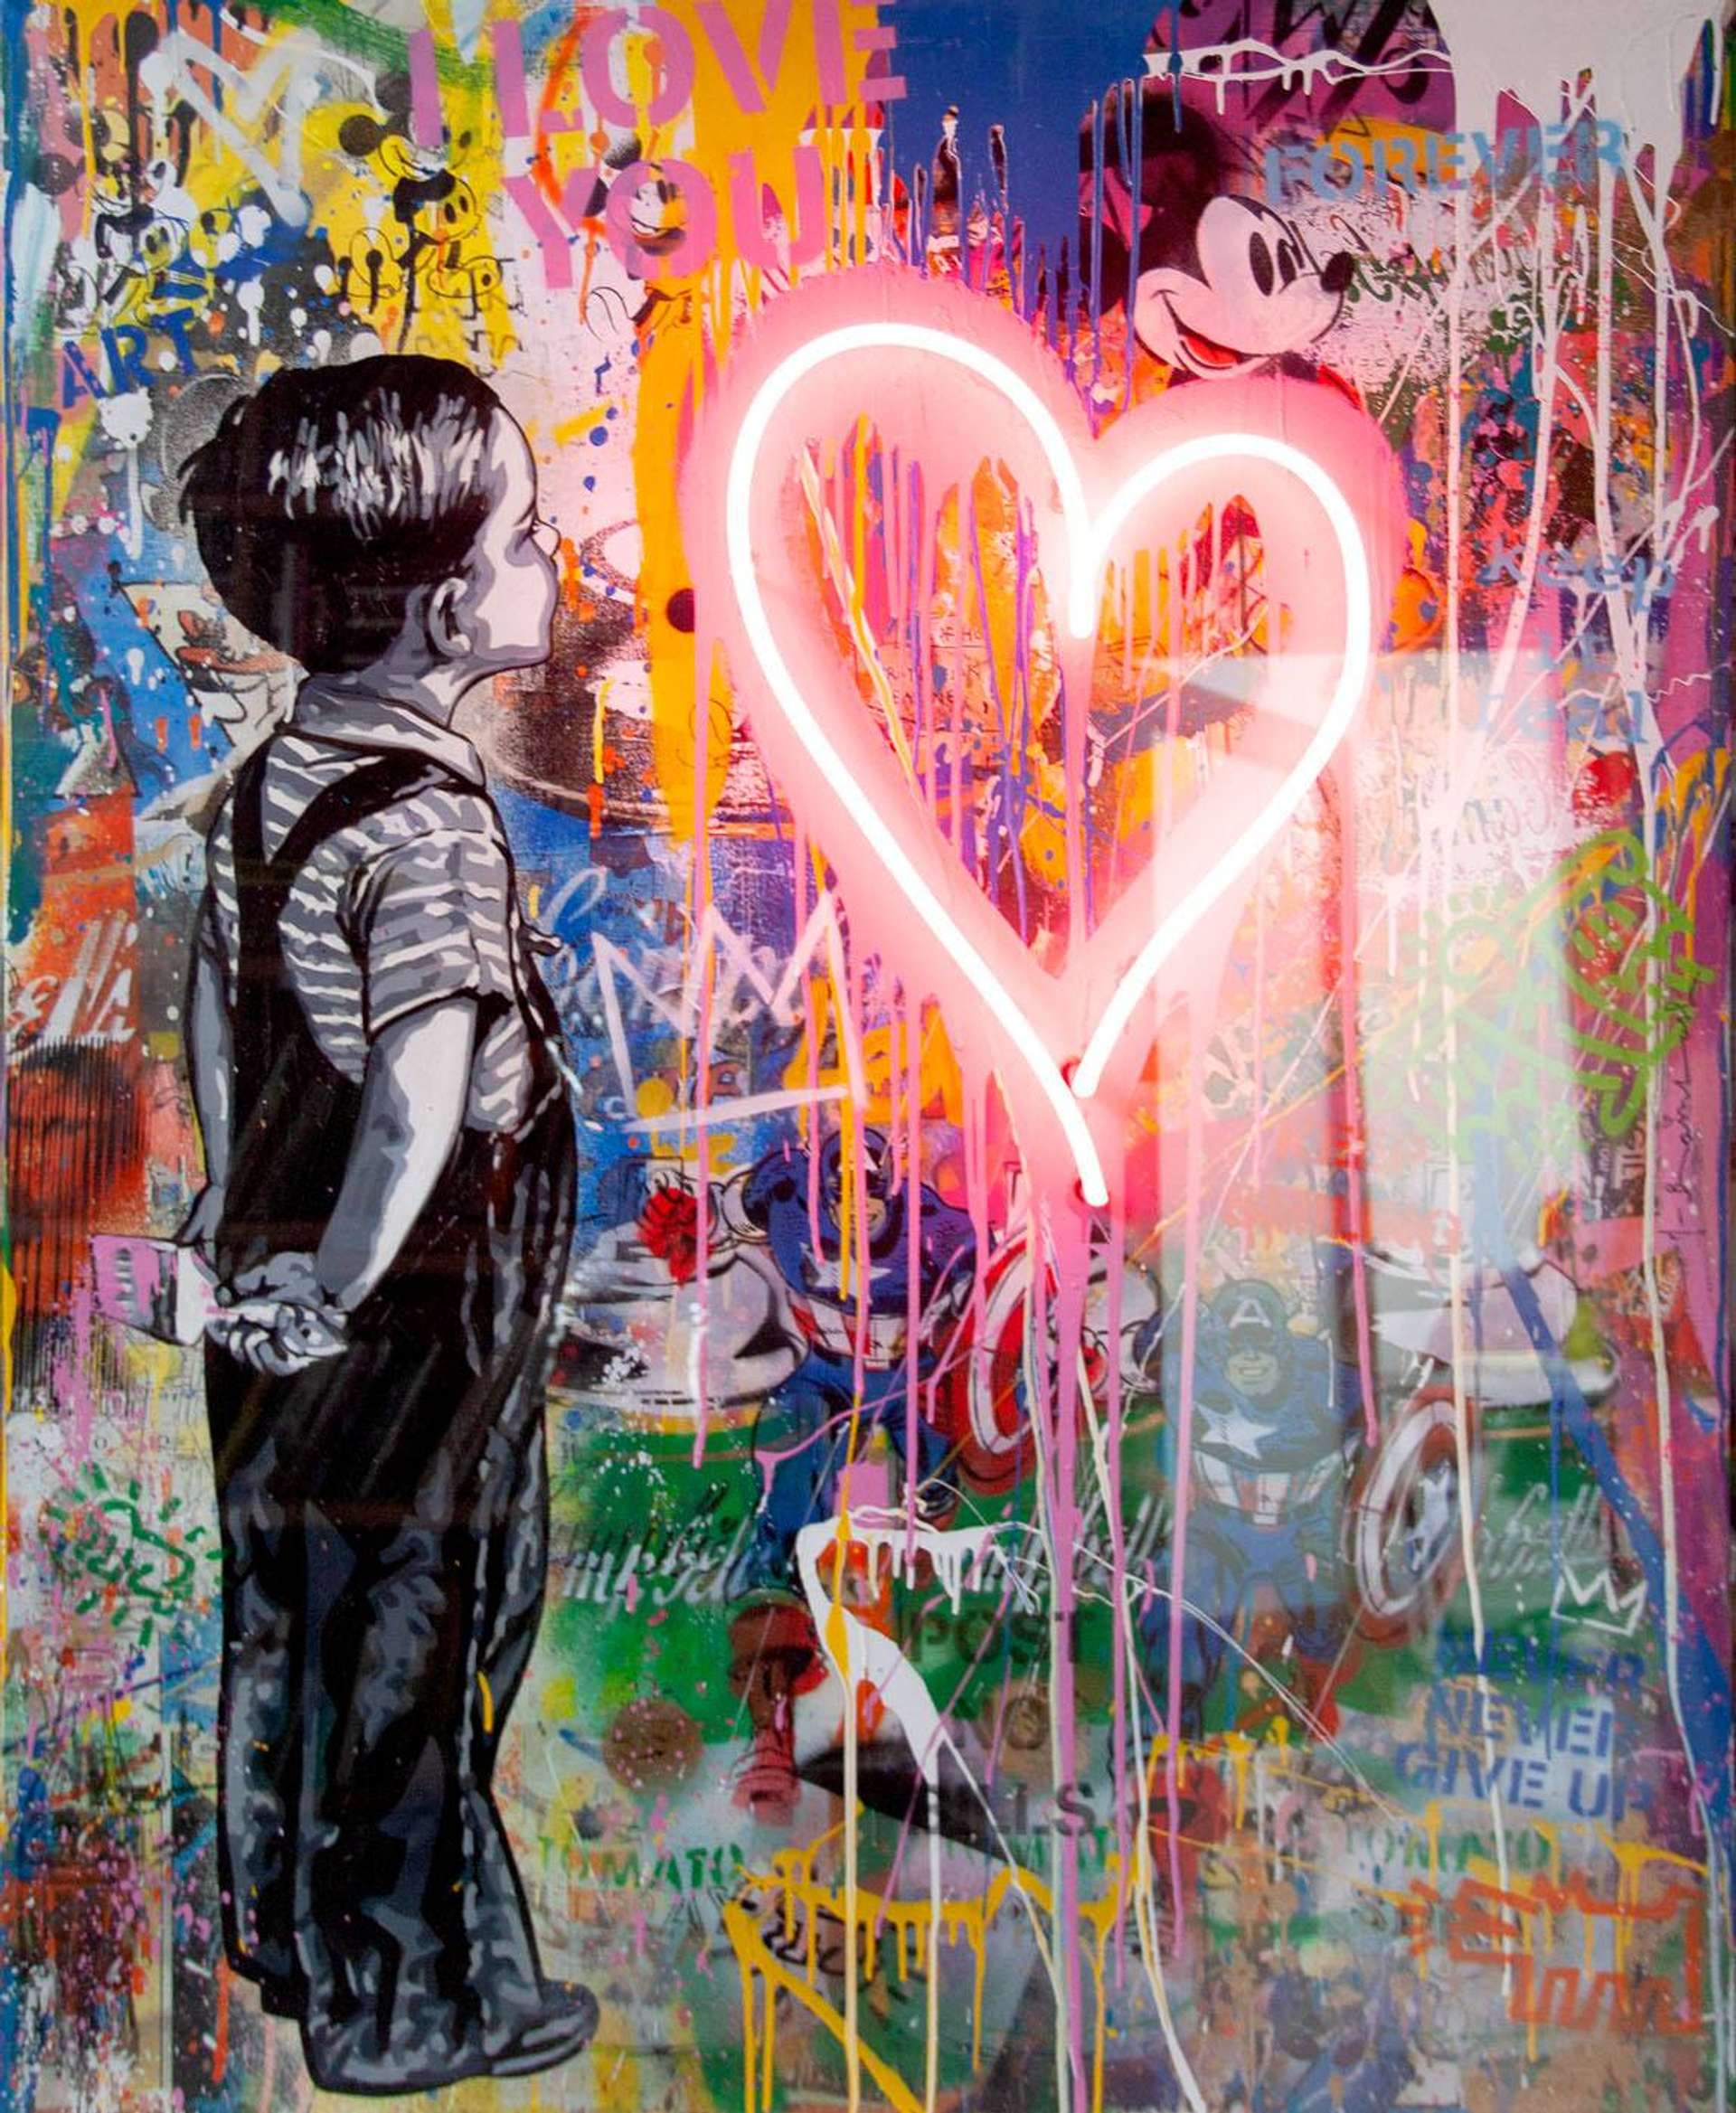 With All My Love by Mr. Brainwash